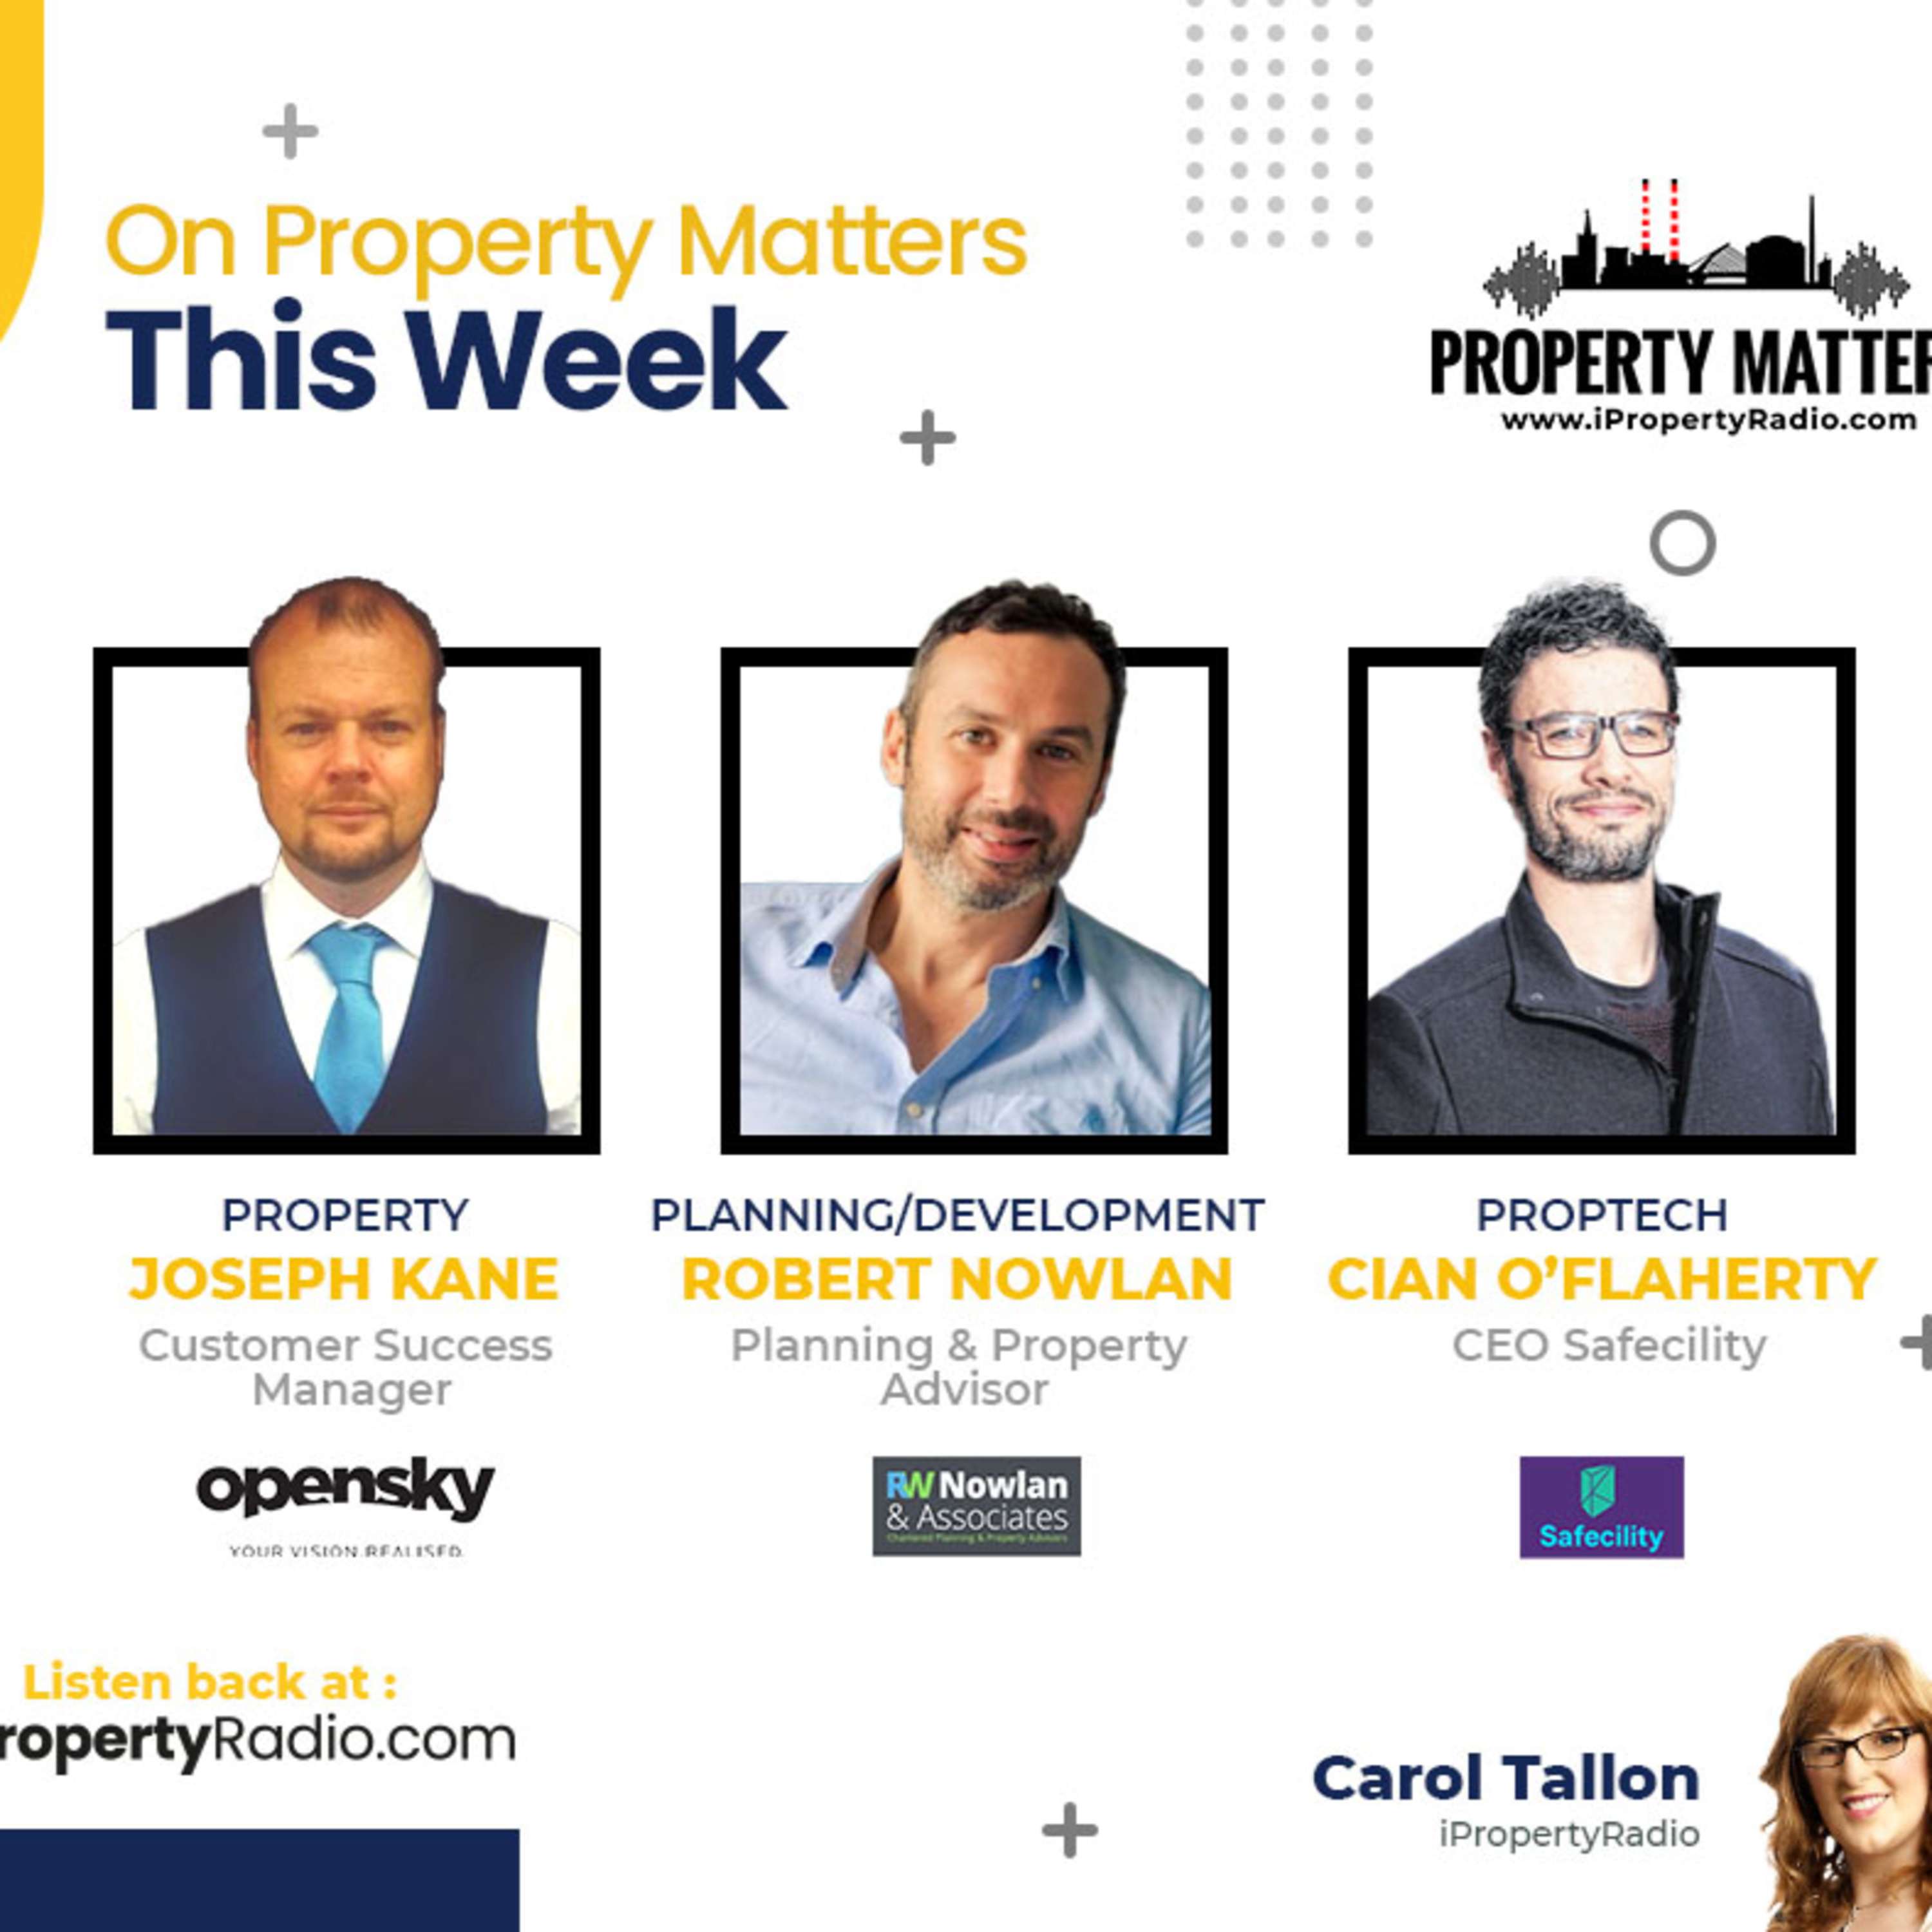 Property Matters on iPropertyRadio - January 26th 2021: Open Sky, RW Nowlan & Associates and Safecility